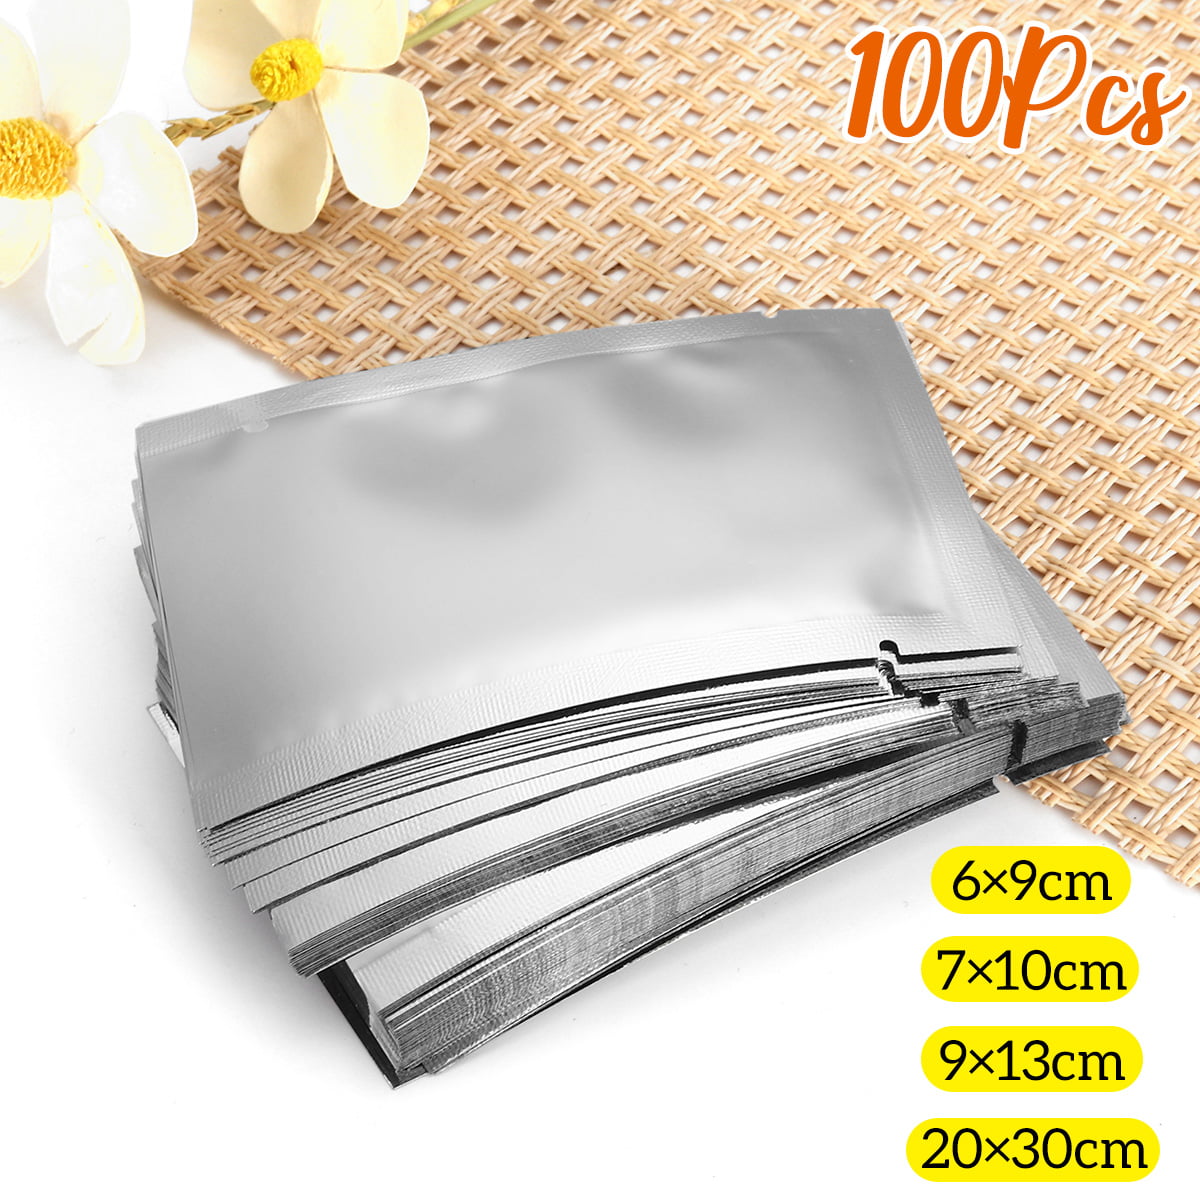 Smell Proof Bags Clear Mylar Plastic & Aluminum Foil Odour Herb & Food Storage 